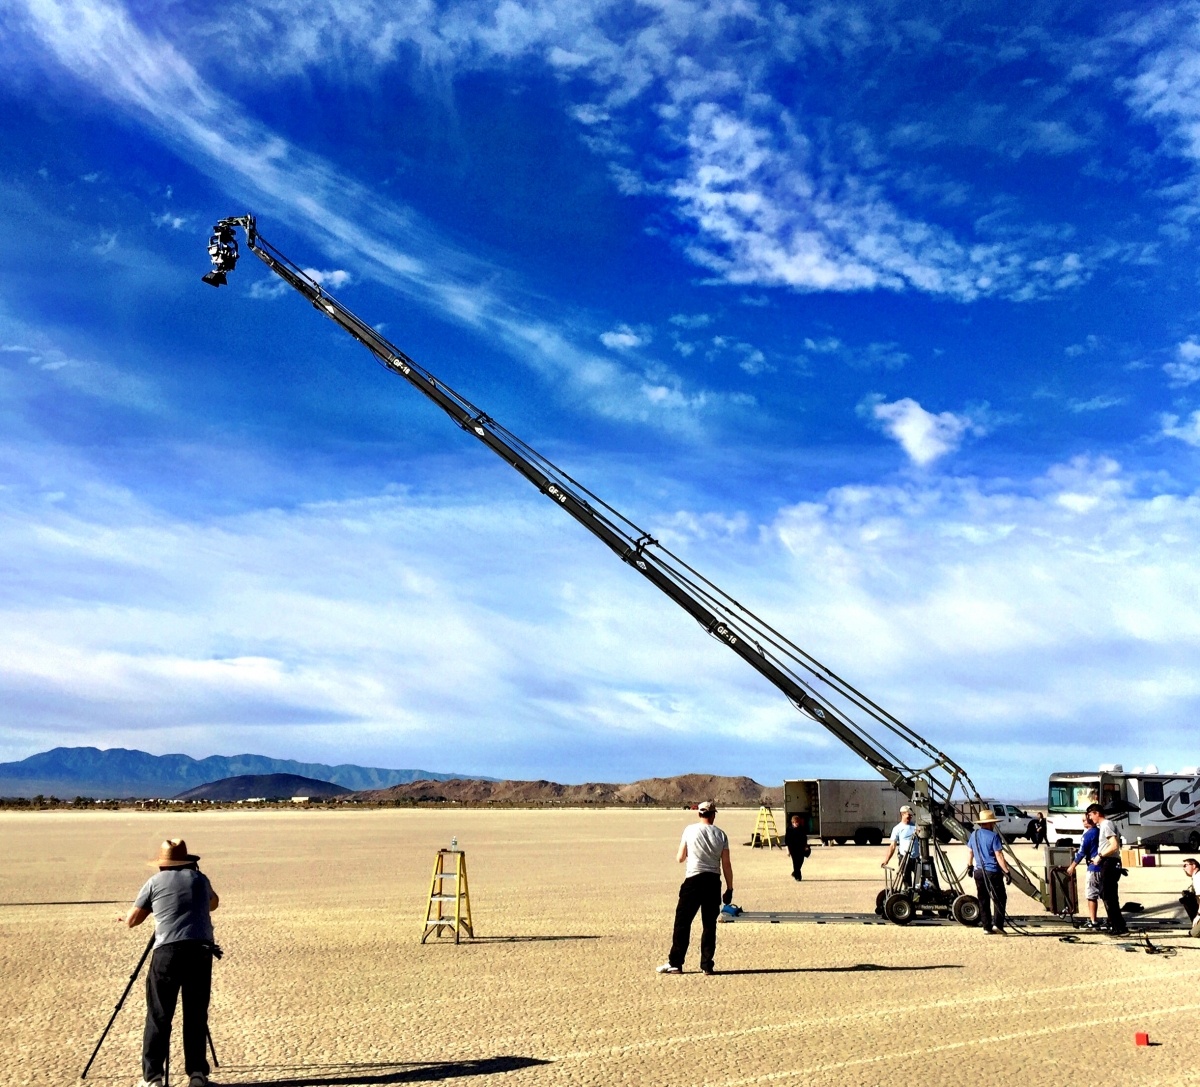 The Mo-Sys G50 on a GF Crane shooting scene on El Mirage Lake in California.